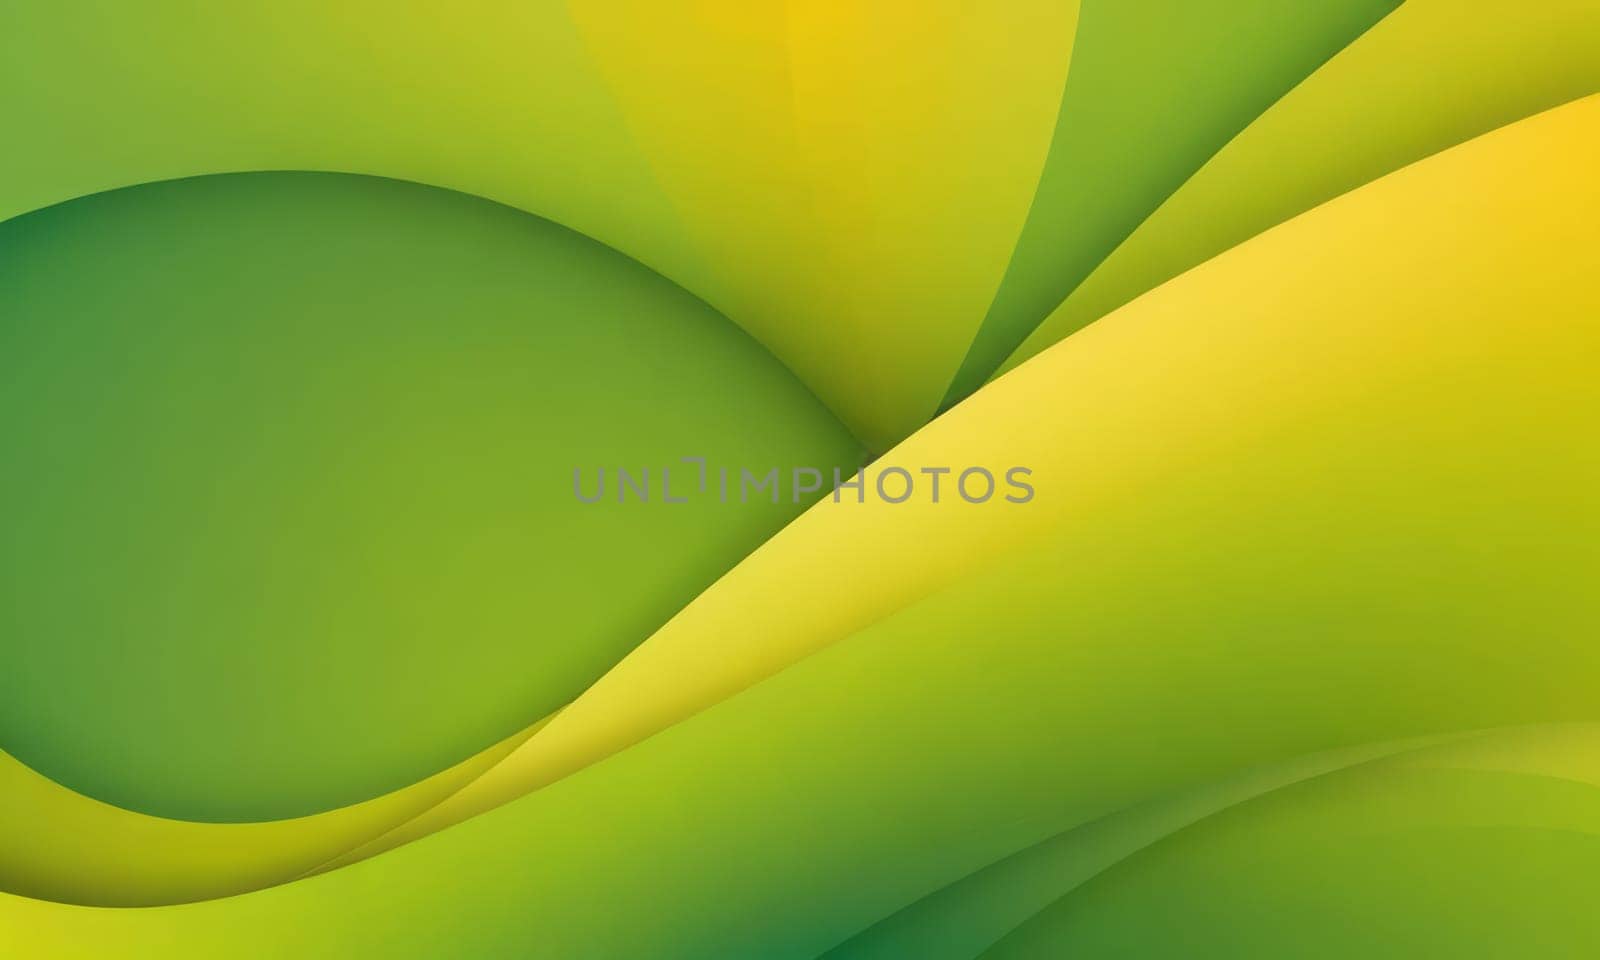 Helical Shapes in Yellow Spring green by nkotlyar